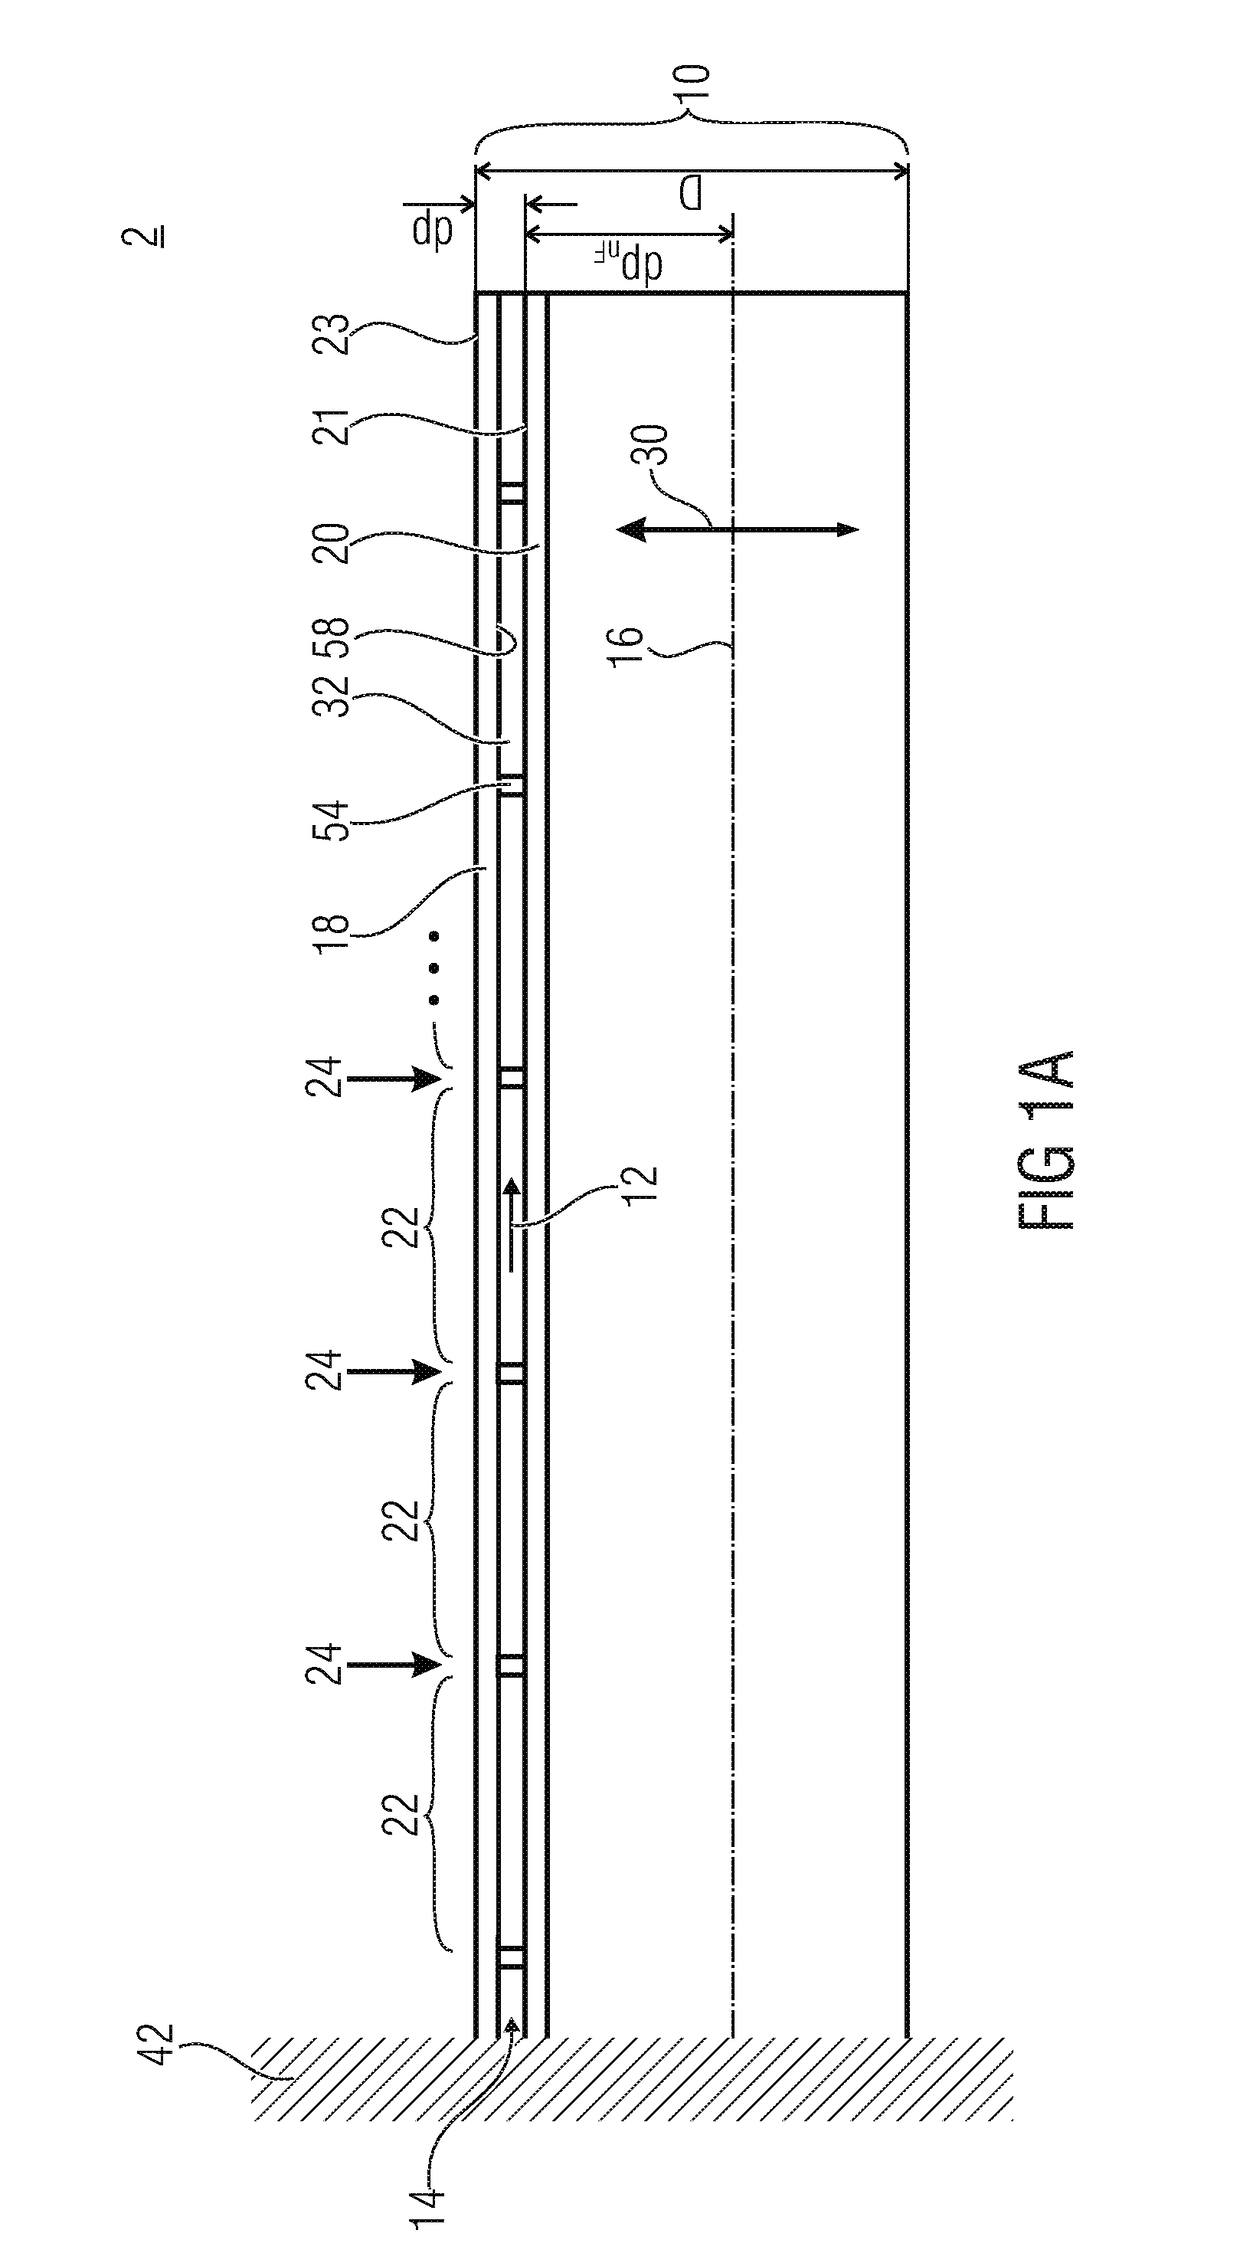 Micromechanical device with an actively deflectable element